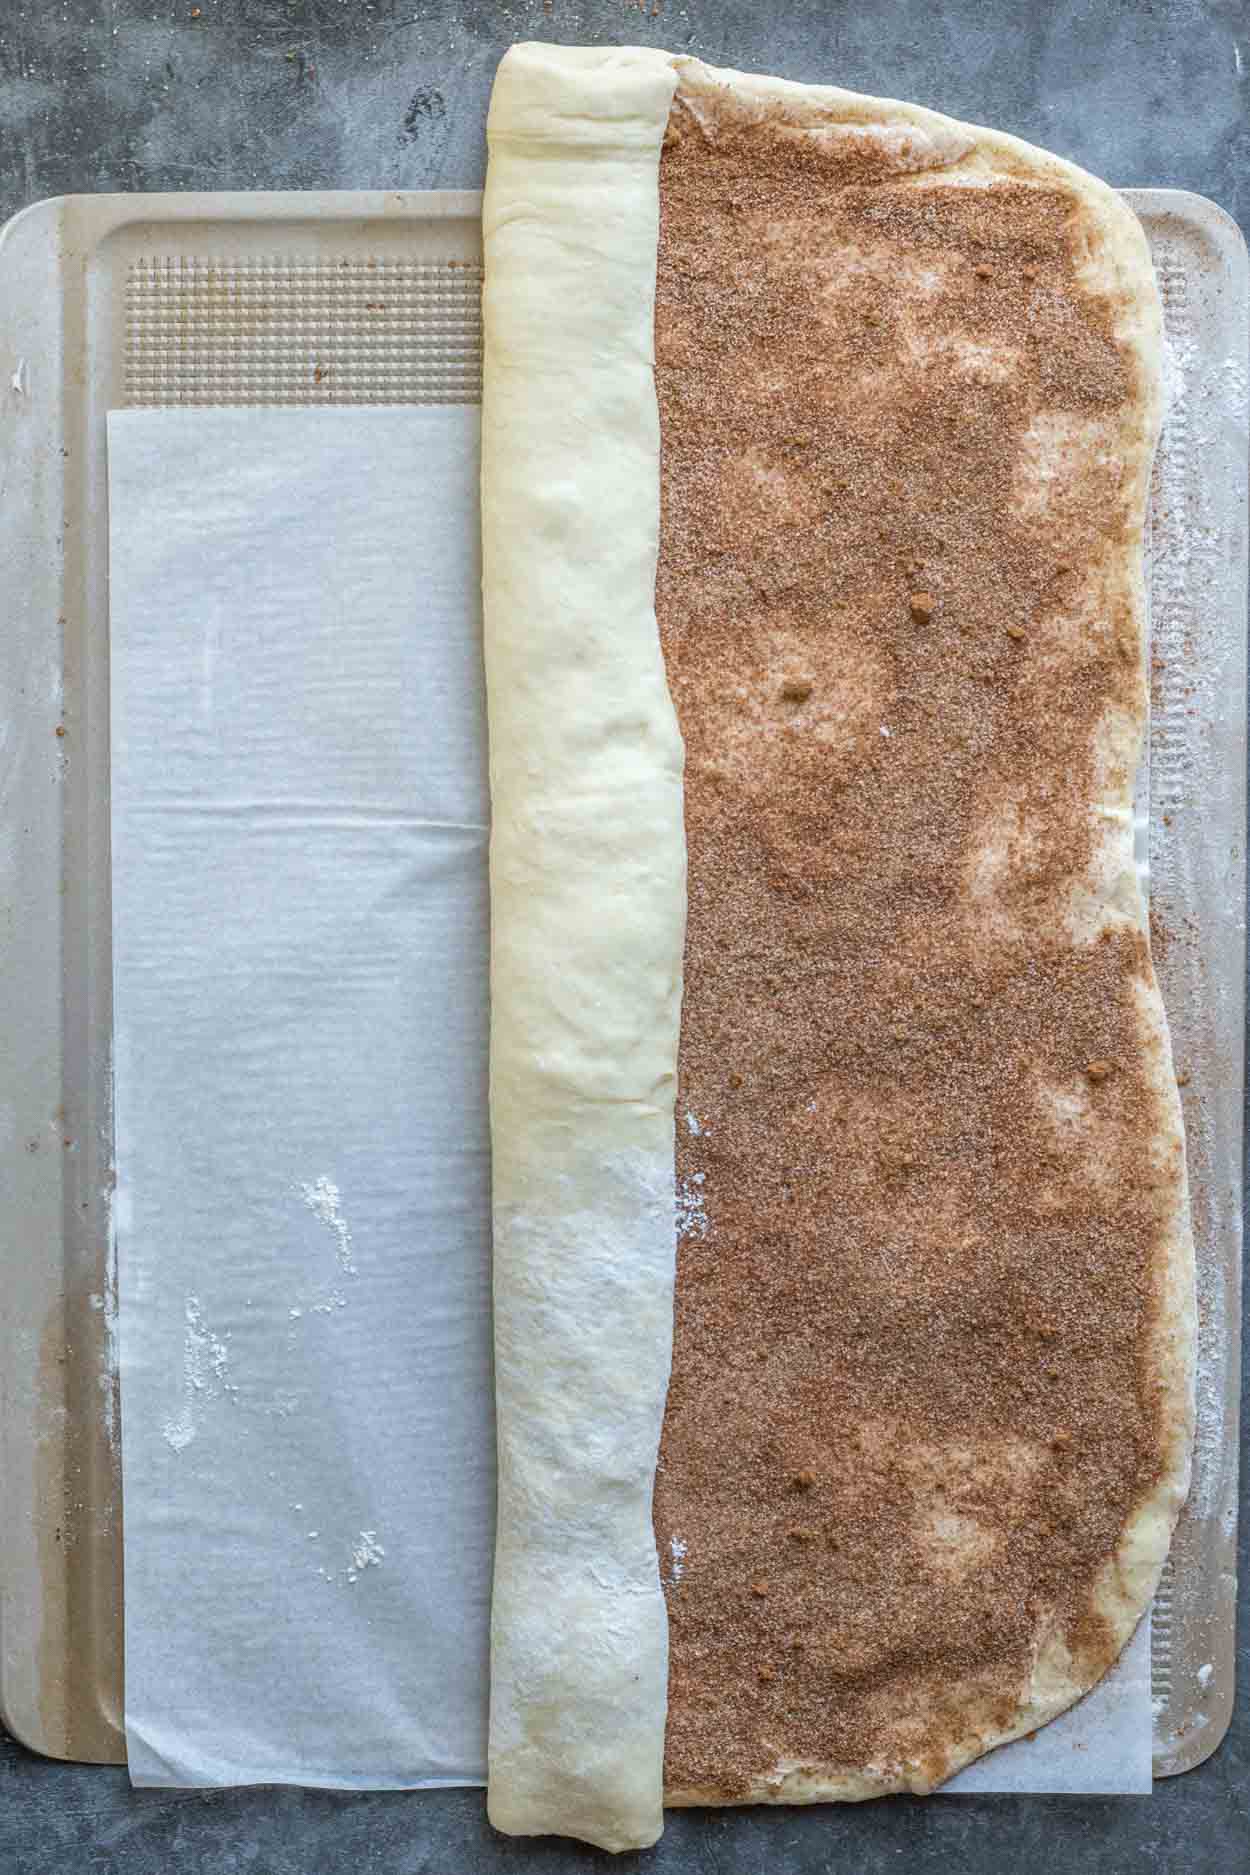 The cinnamon roll dough, rolled out into a large rectangle, with the cinnamon sugar mixture spread out.